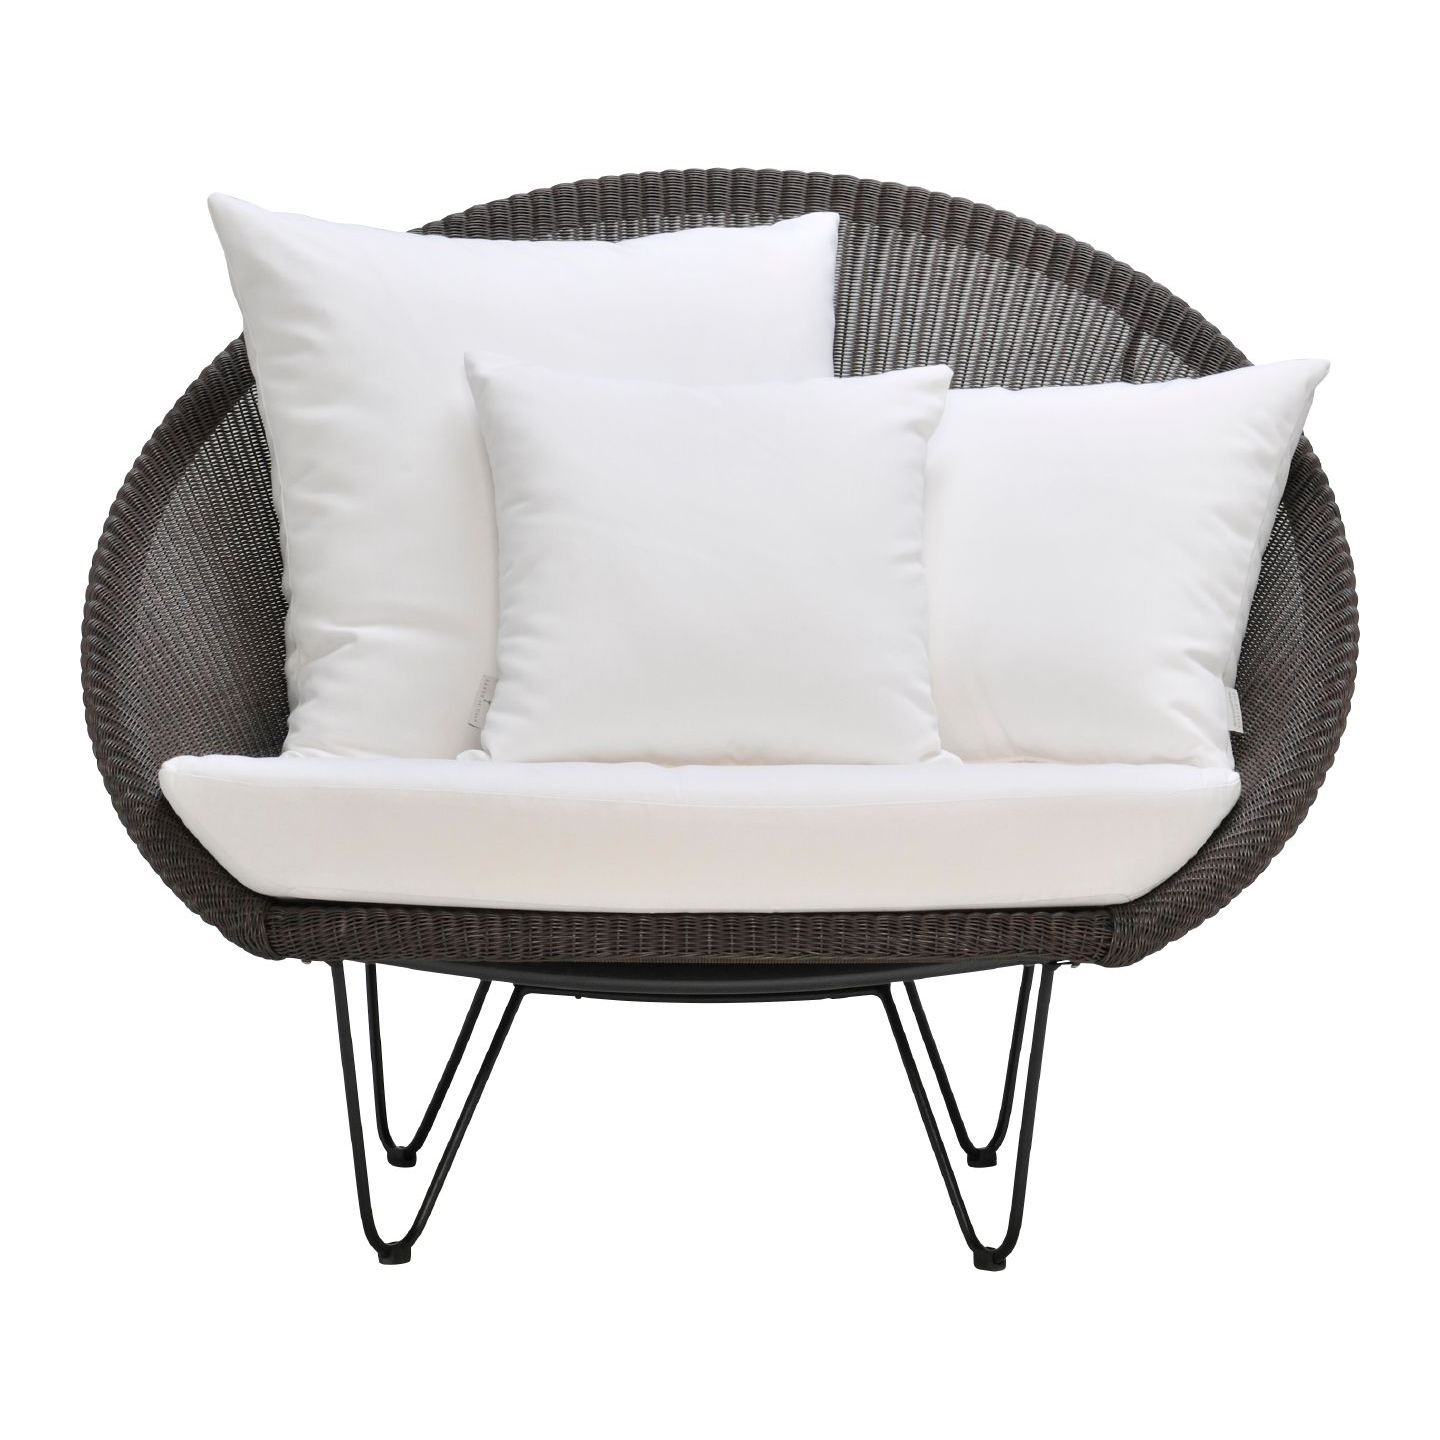 Haworth Gigi II lounge chair in black color with white seating and cushions